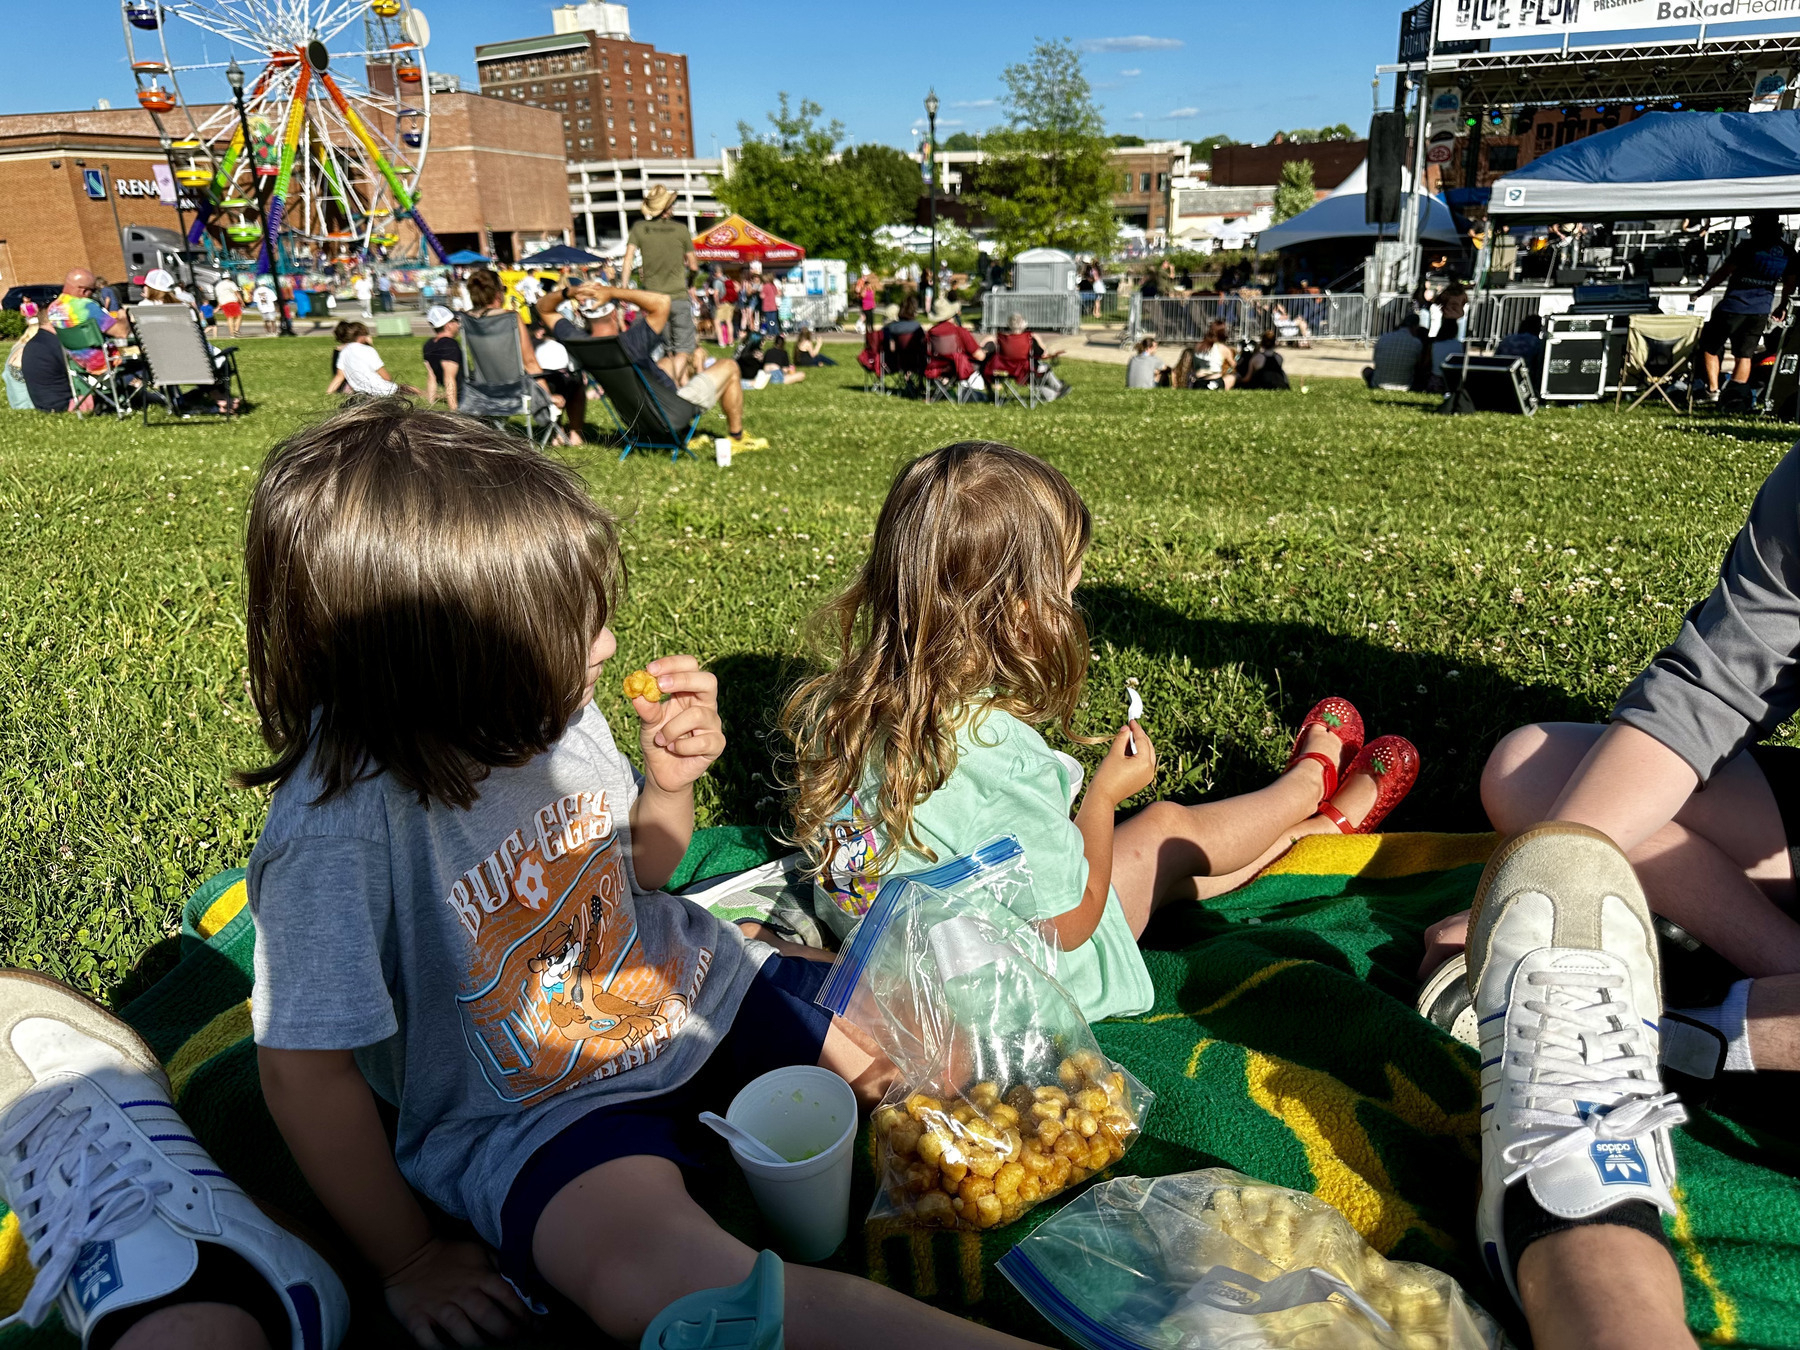 Auto-generated description: Two children are sitting on a blanket eating snacks at an outdoor event with a Ferris wheel in the background.